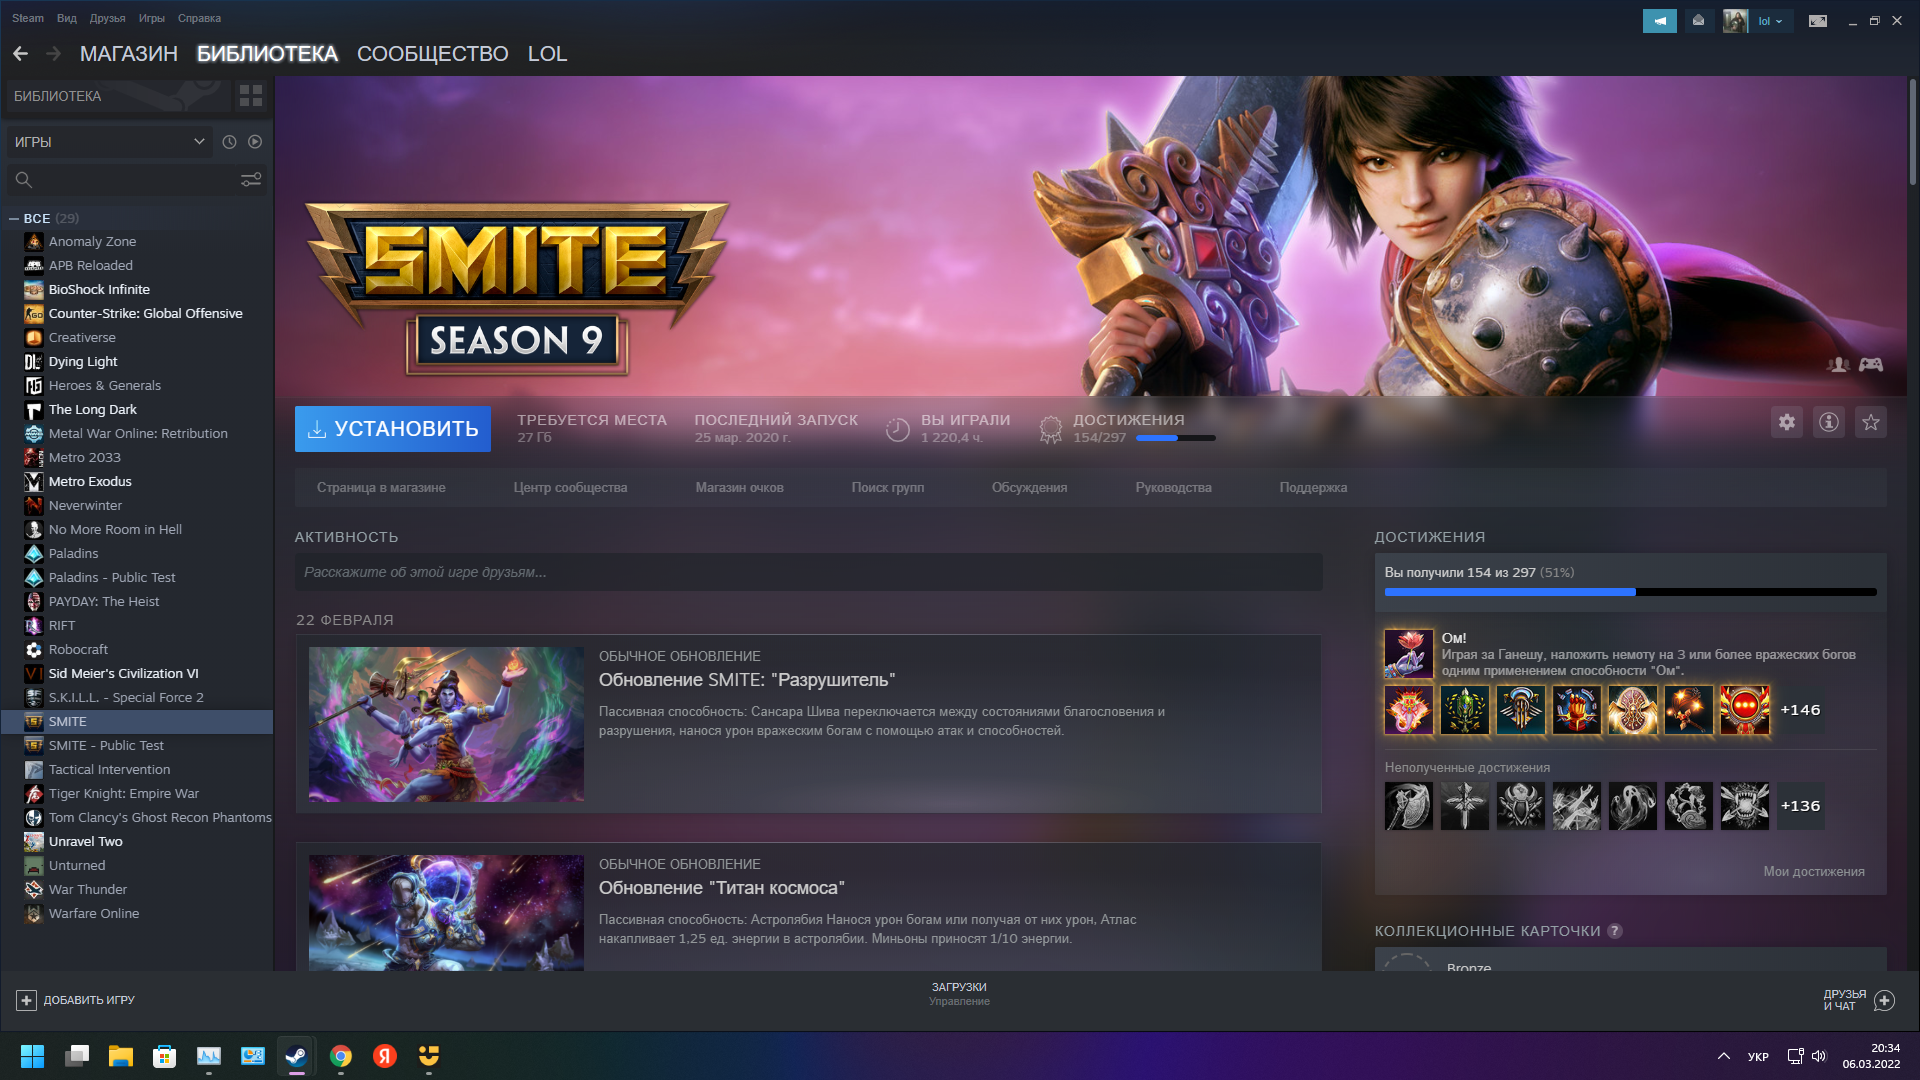 Smite on steam not working фото 68